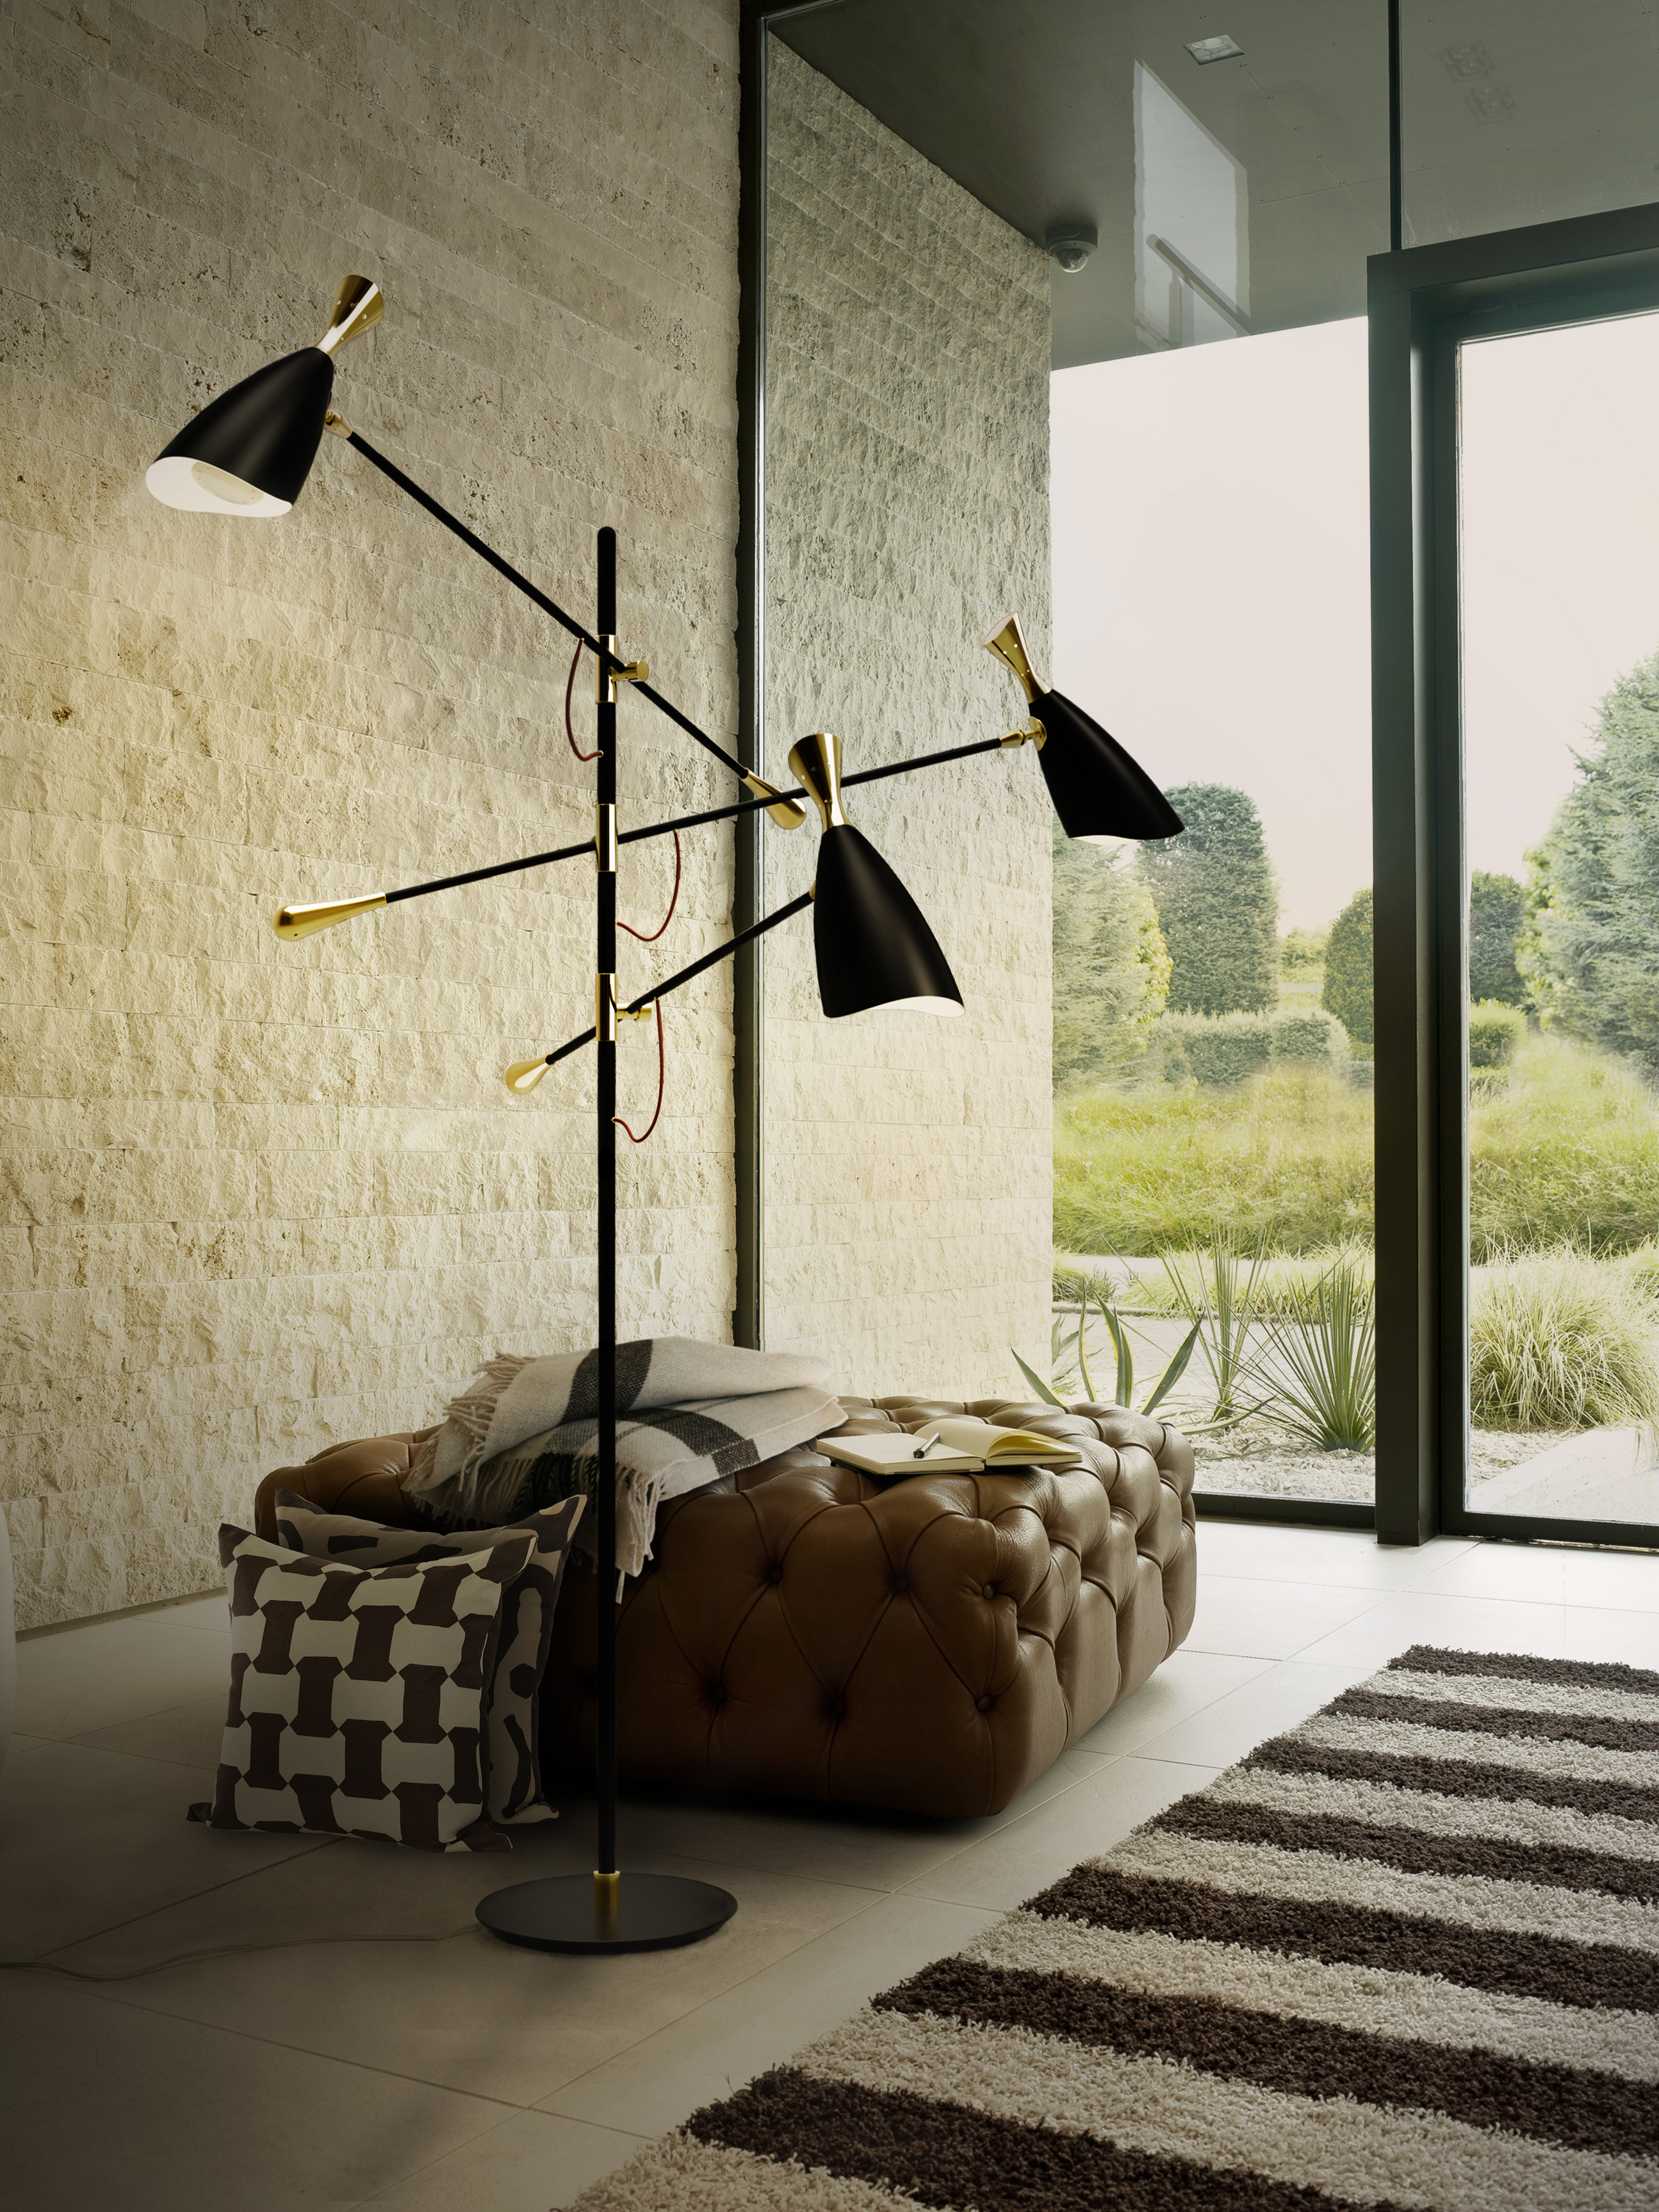 Bright Ideas The Perfect Modern Floor Lamp for Perusing Real Books 1